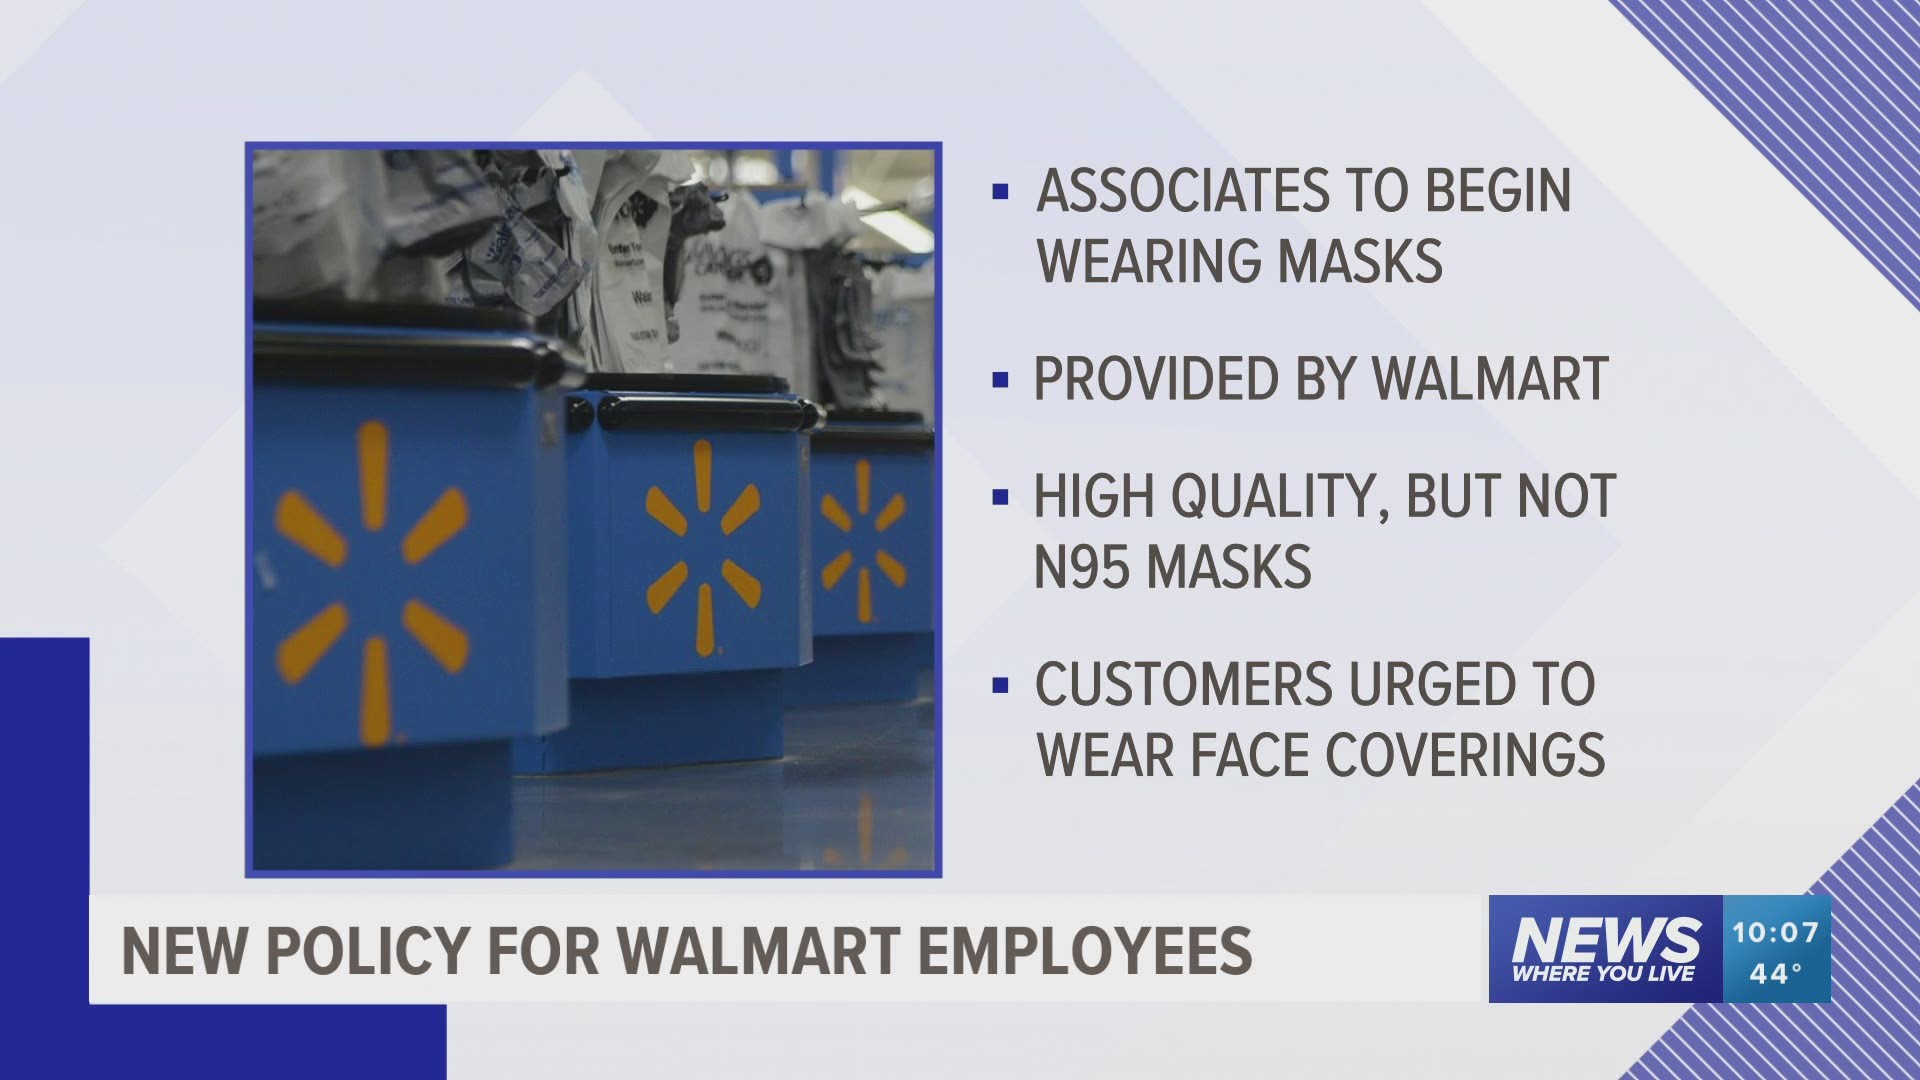 Walmart announced it would be requiring store associates to wear face masks during the coronavirus pandemic.